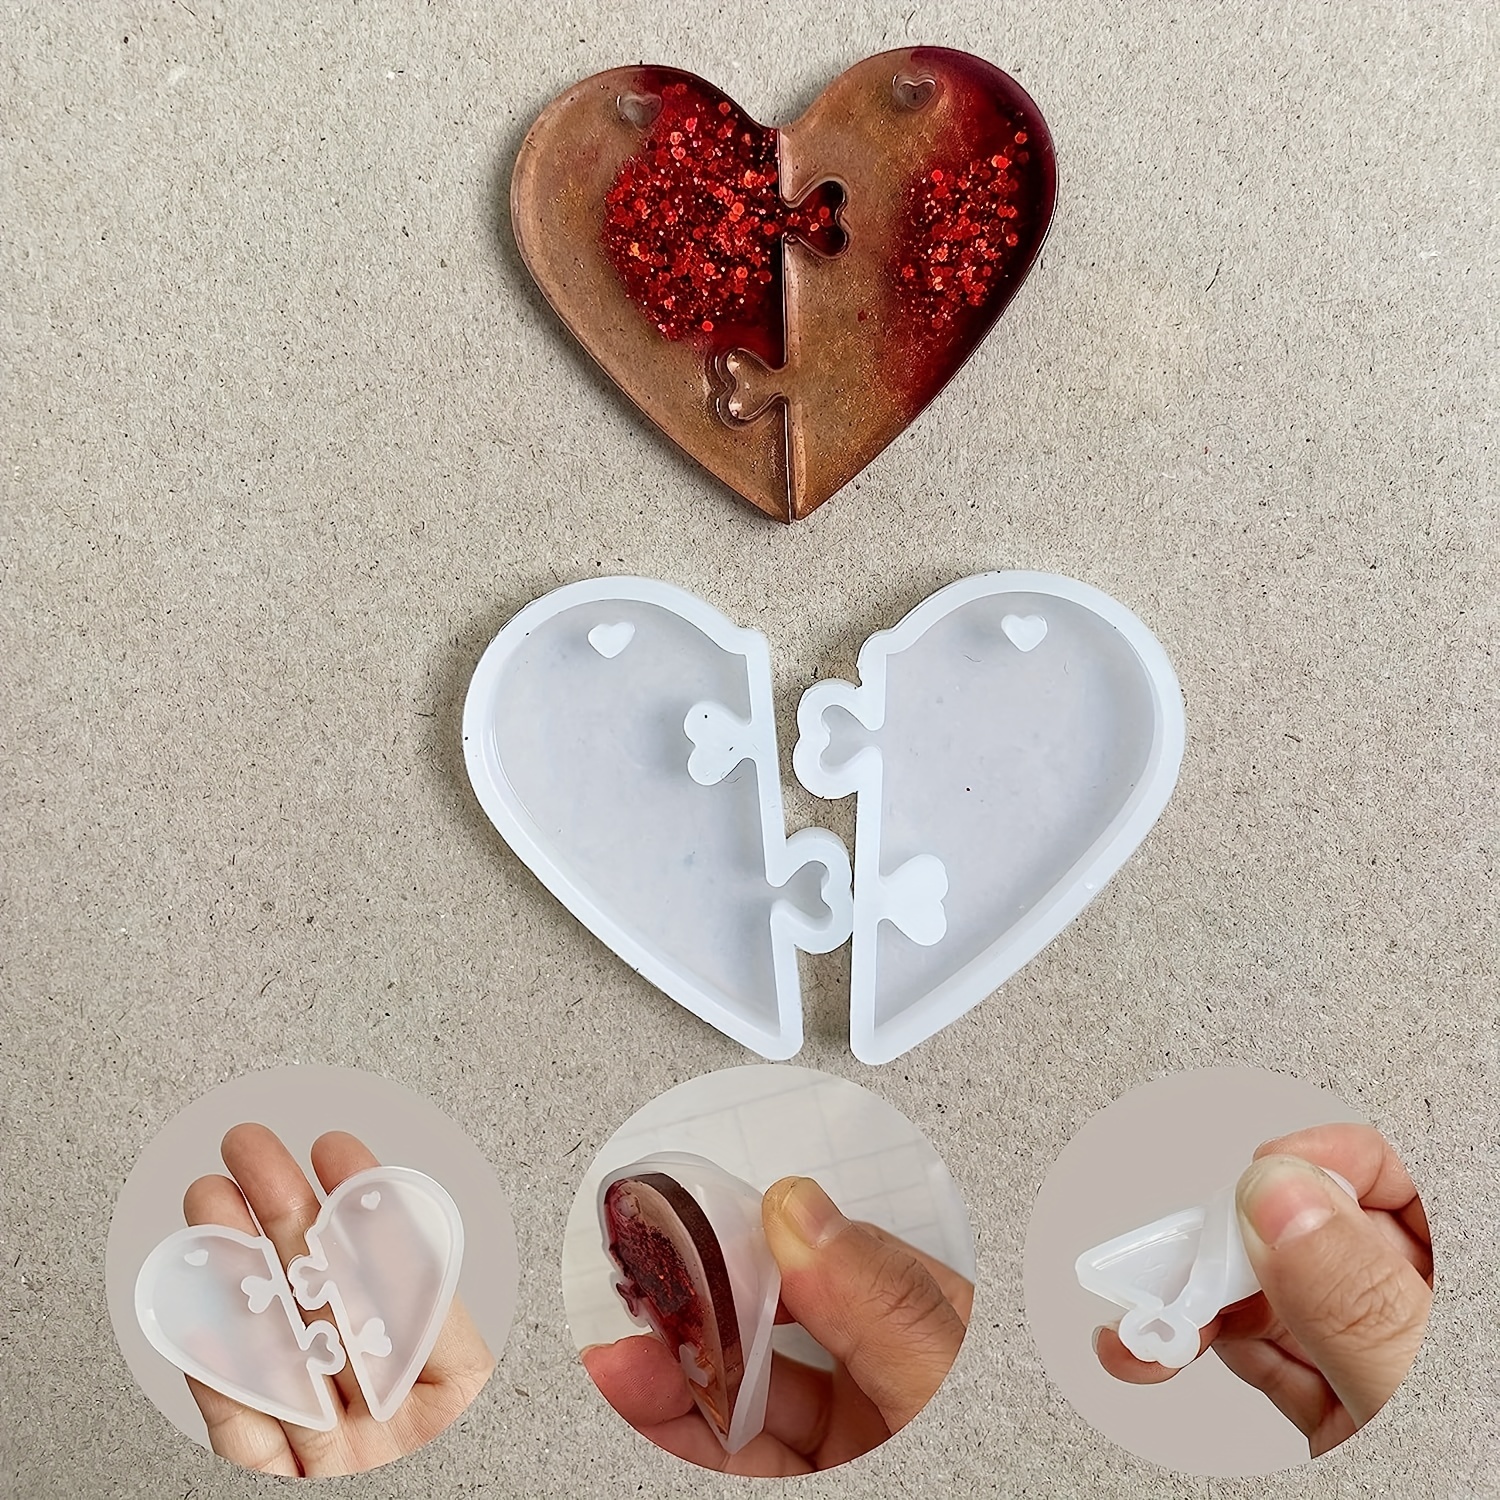 Couple Resin Mold, Heart Resin Molds Silicone Jewelry Keychain